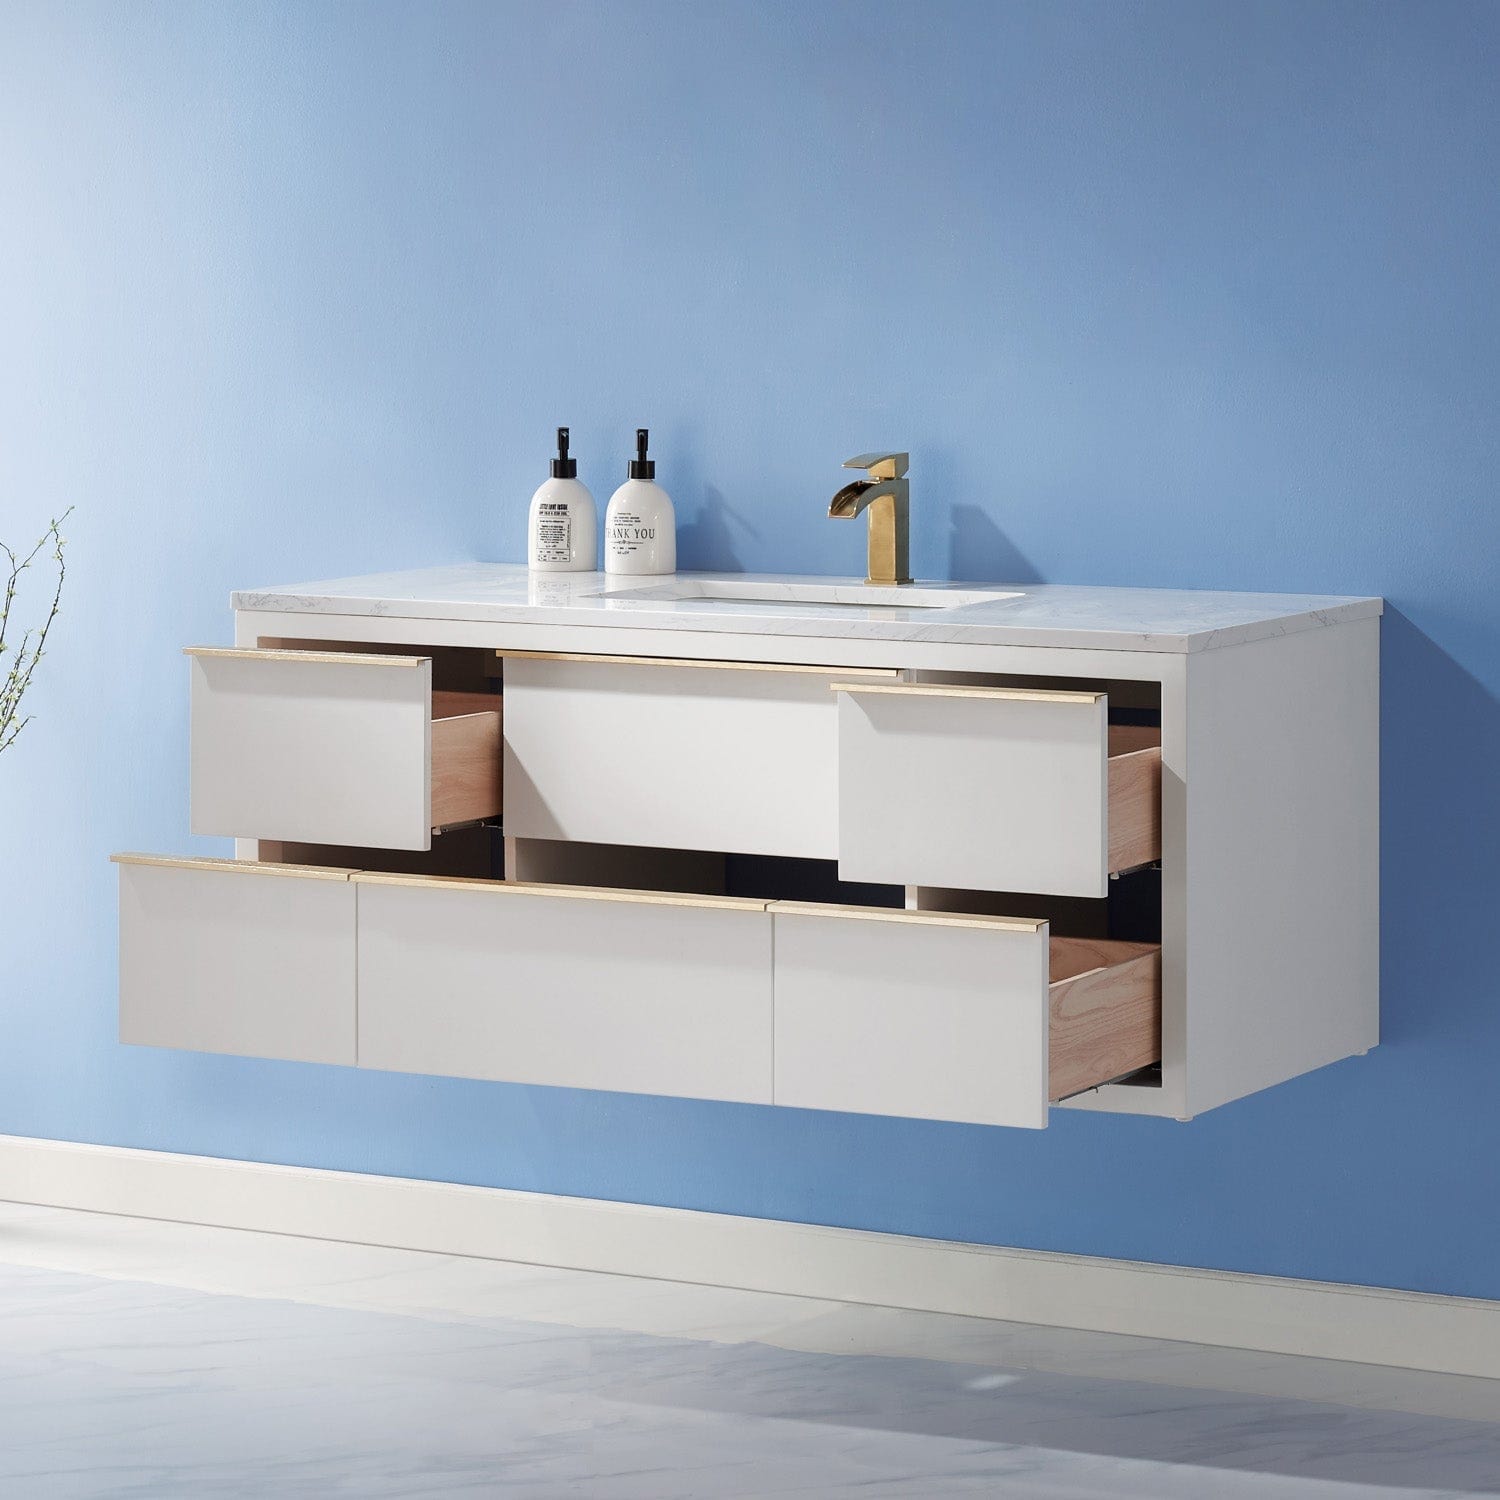 Altair Morgan 48" Single Bathroom Vanity Set in White and Composite Carrara White Stone Countertop without Mirror 534048-WH-AW-NM - Molaix631112971782Vanity534048-WH-AW-NM